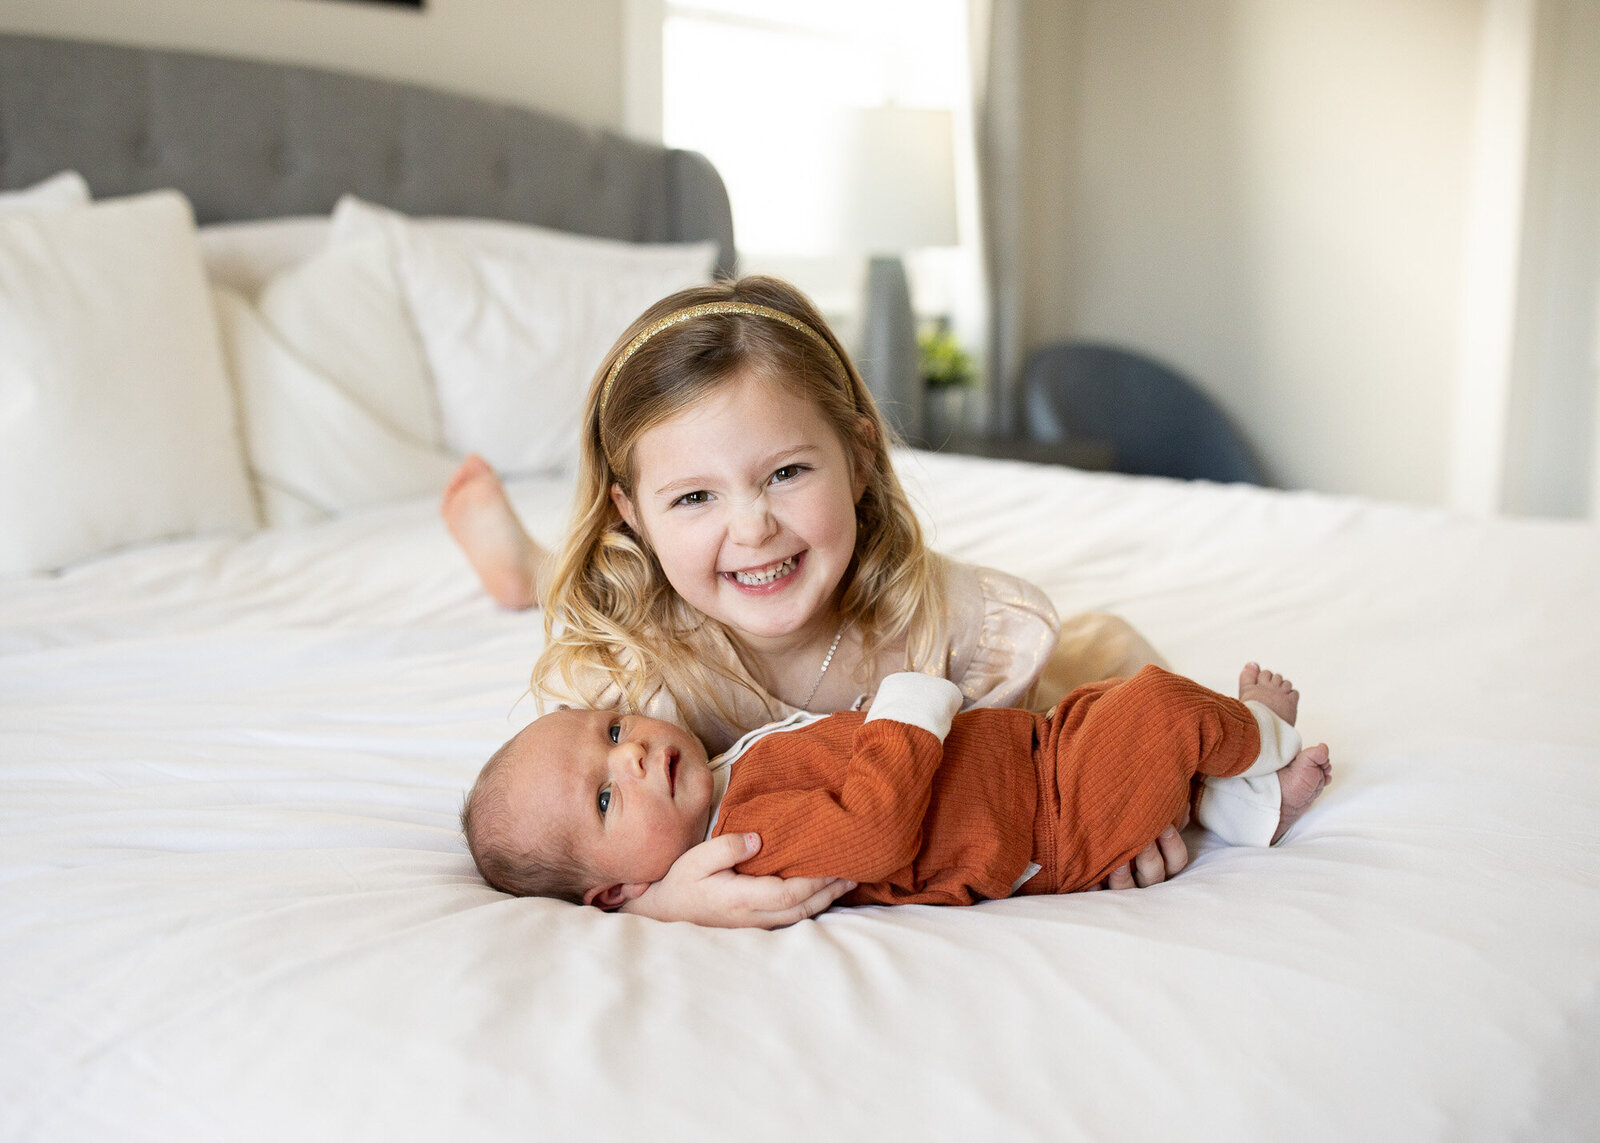 Little girl smiling with newborn brother on bed.